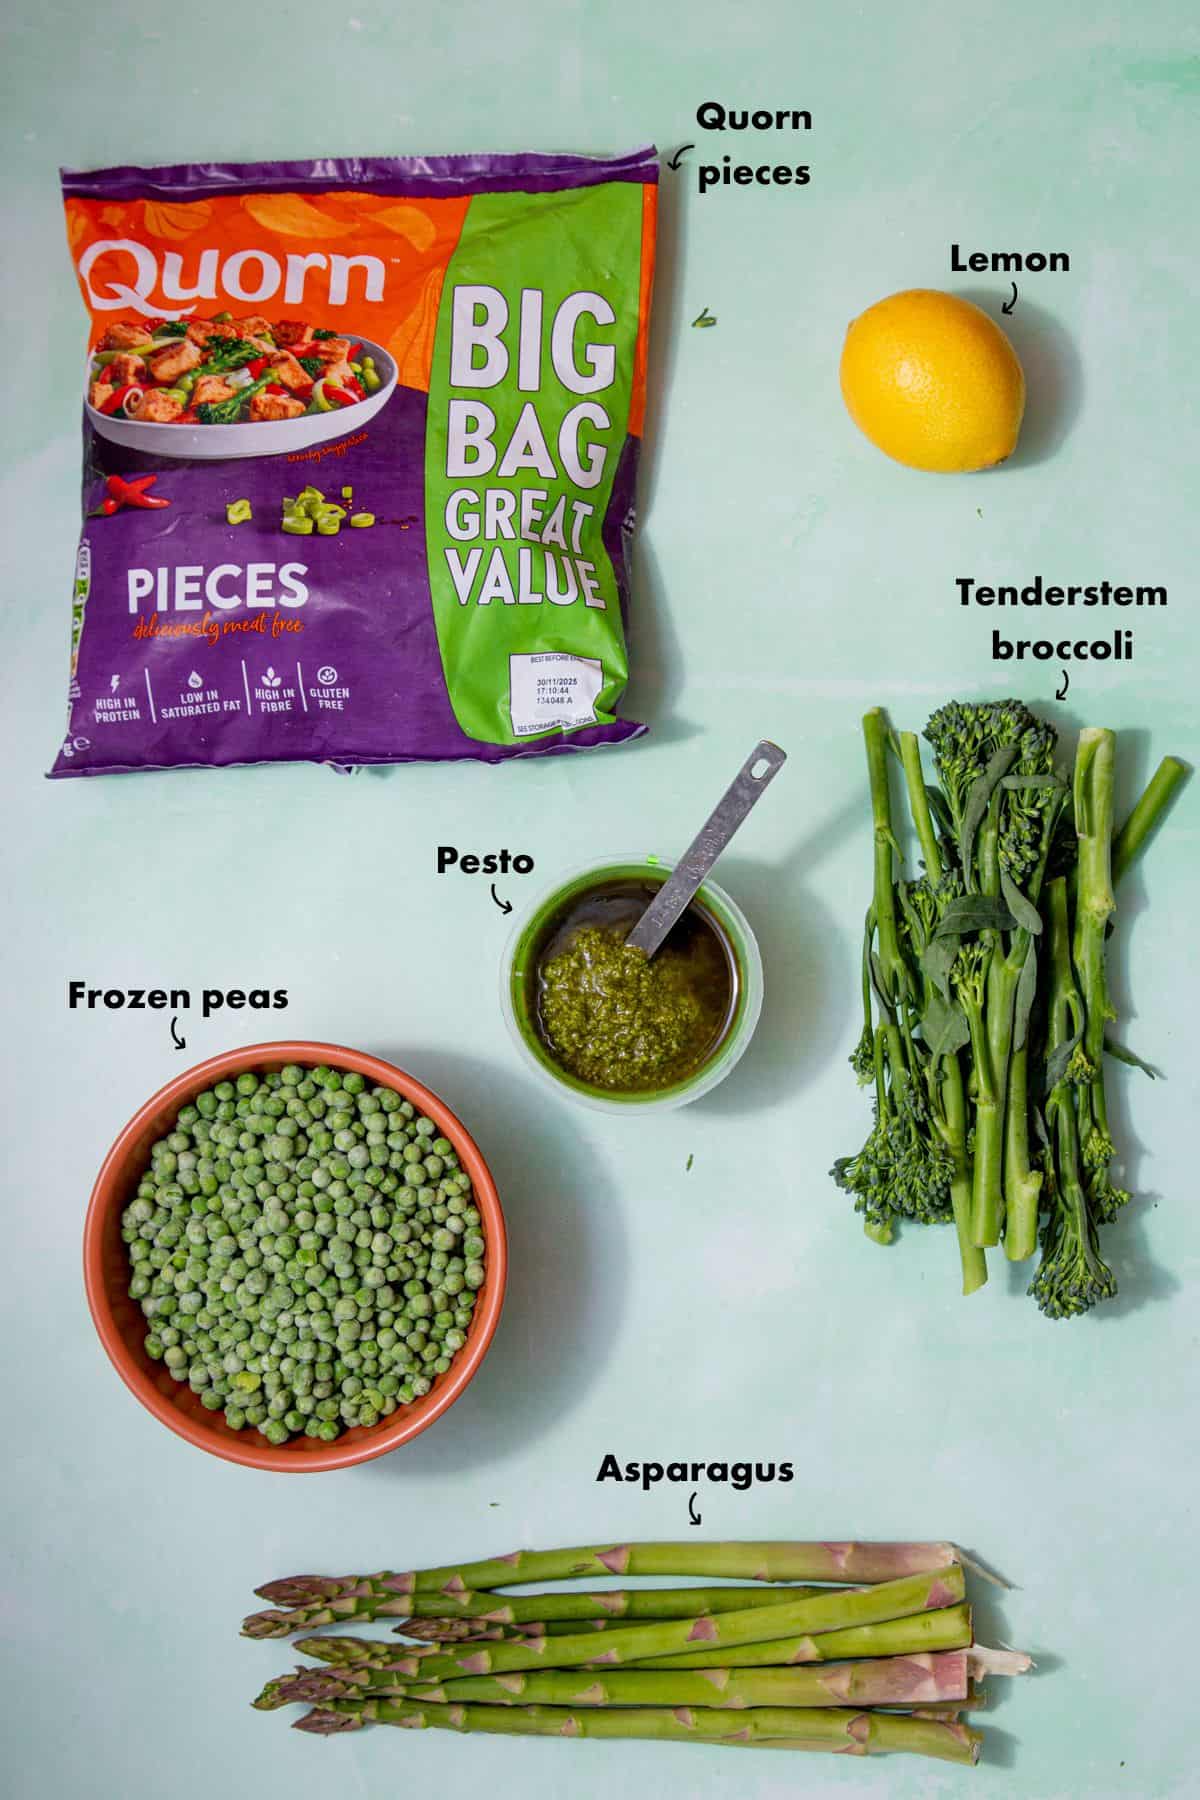 A bag with Quorn pieces and ingredients laid out of a pale blue background and labelled.